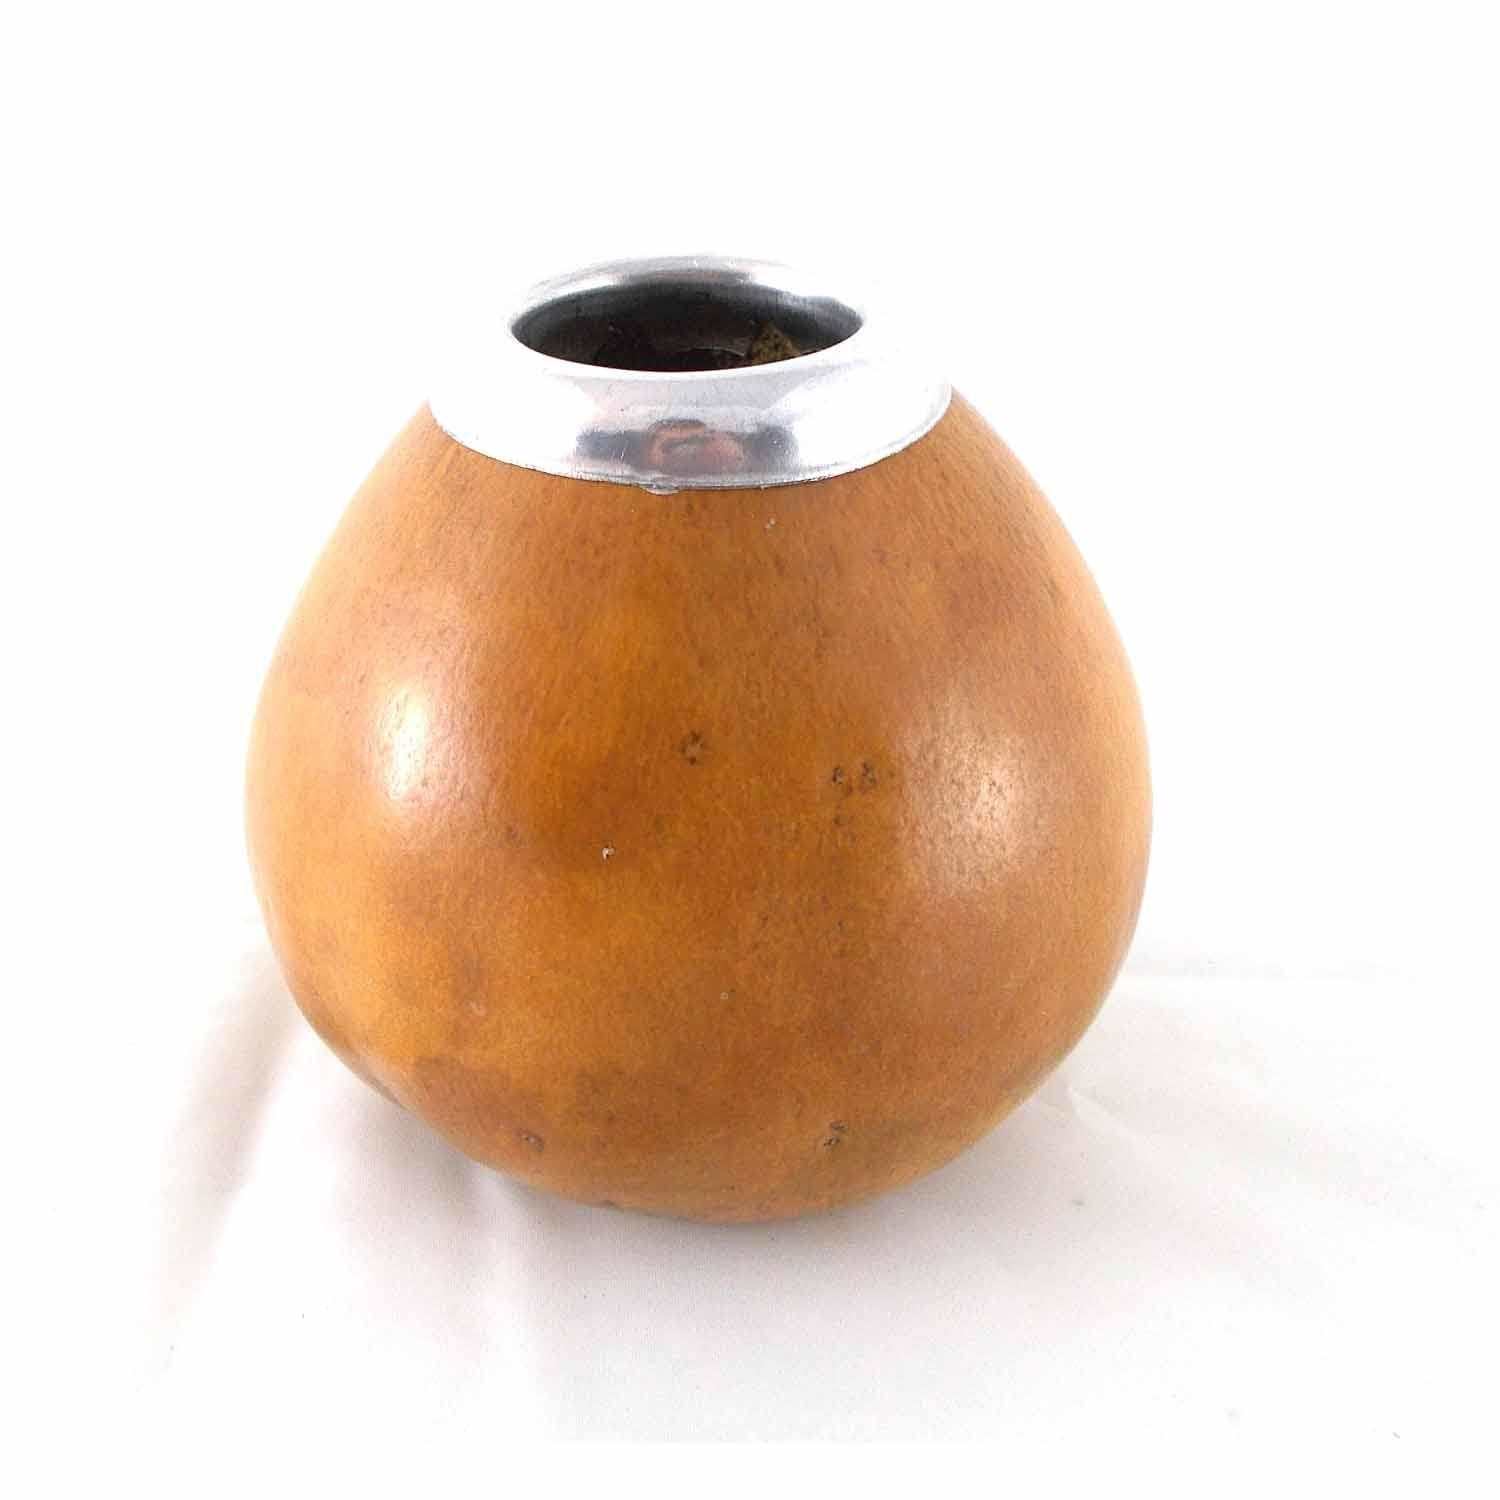 Mate drinking vessel Cuia natural light brown